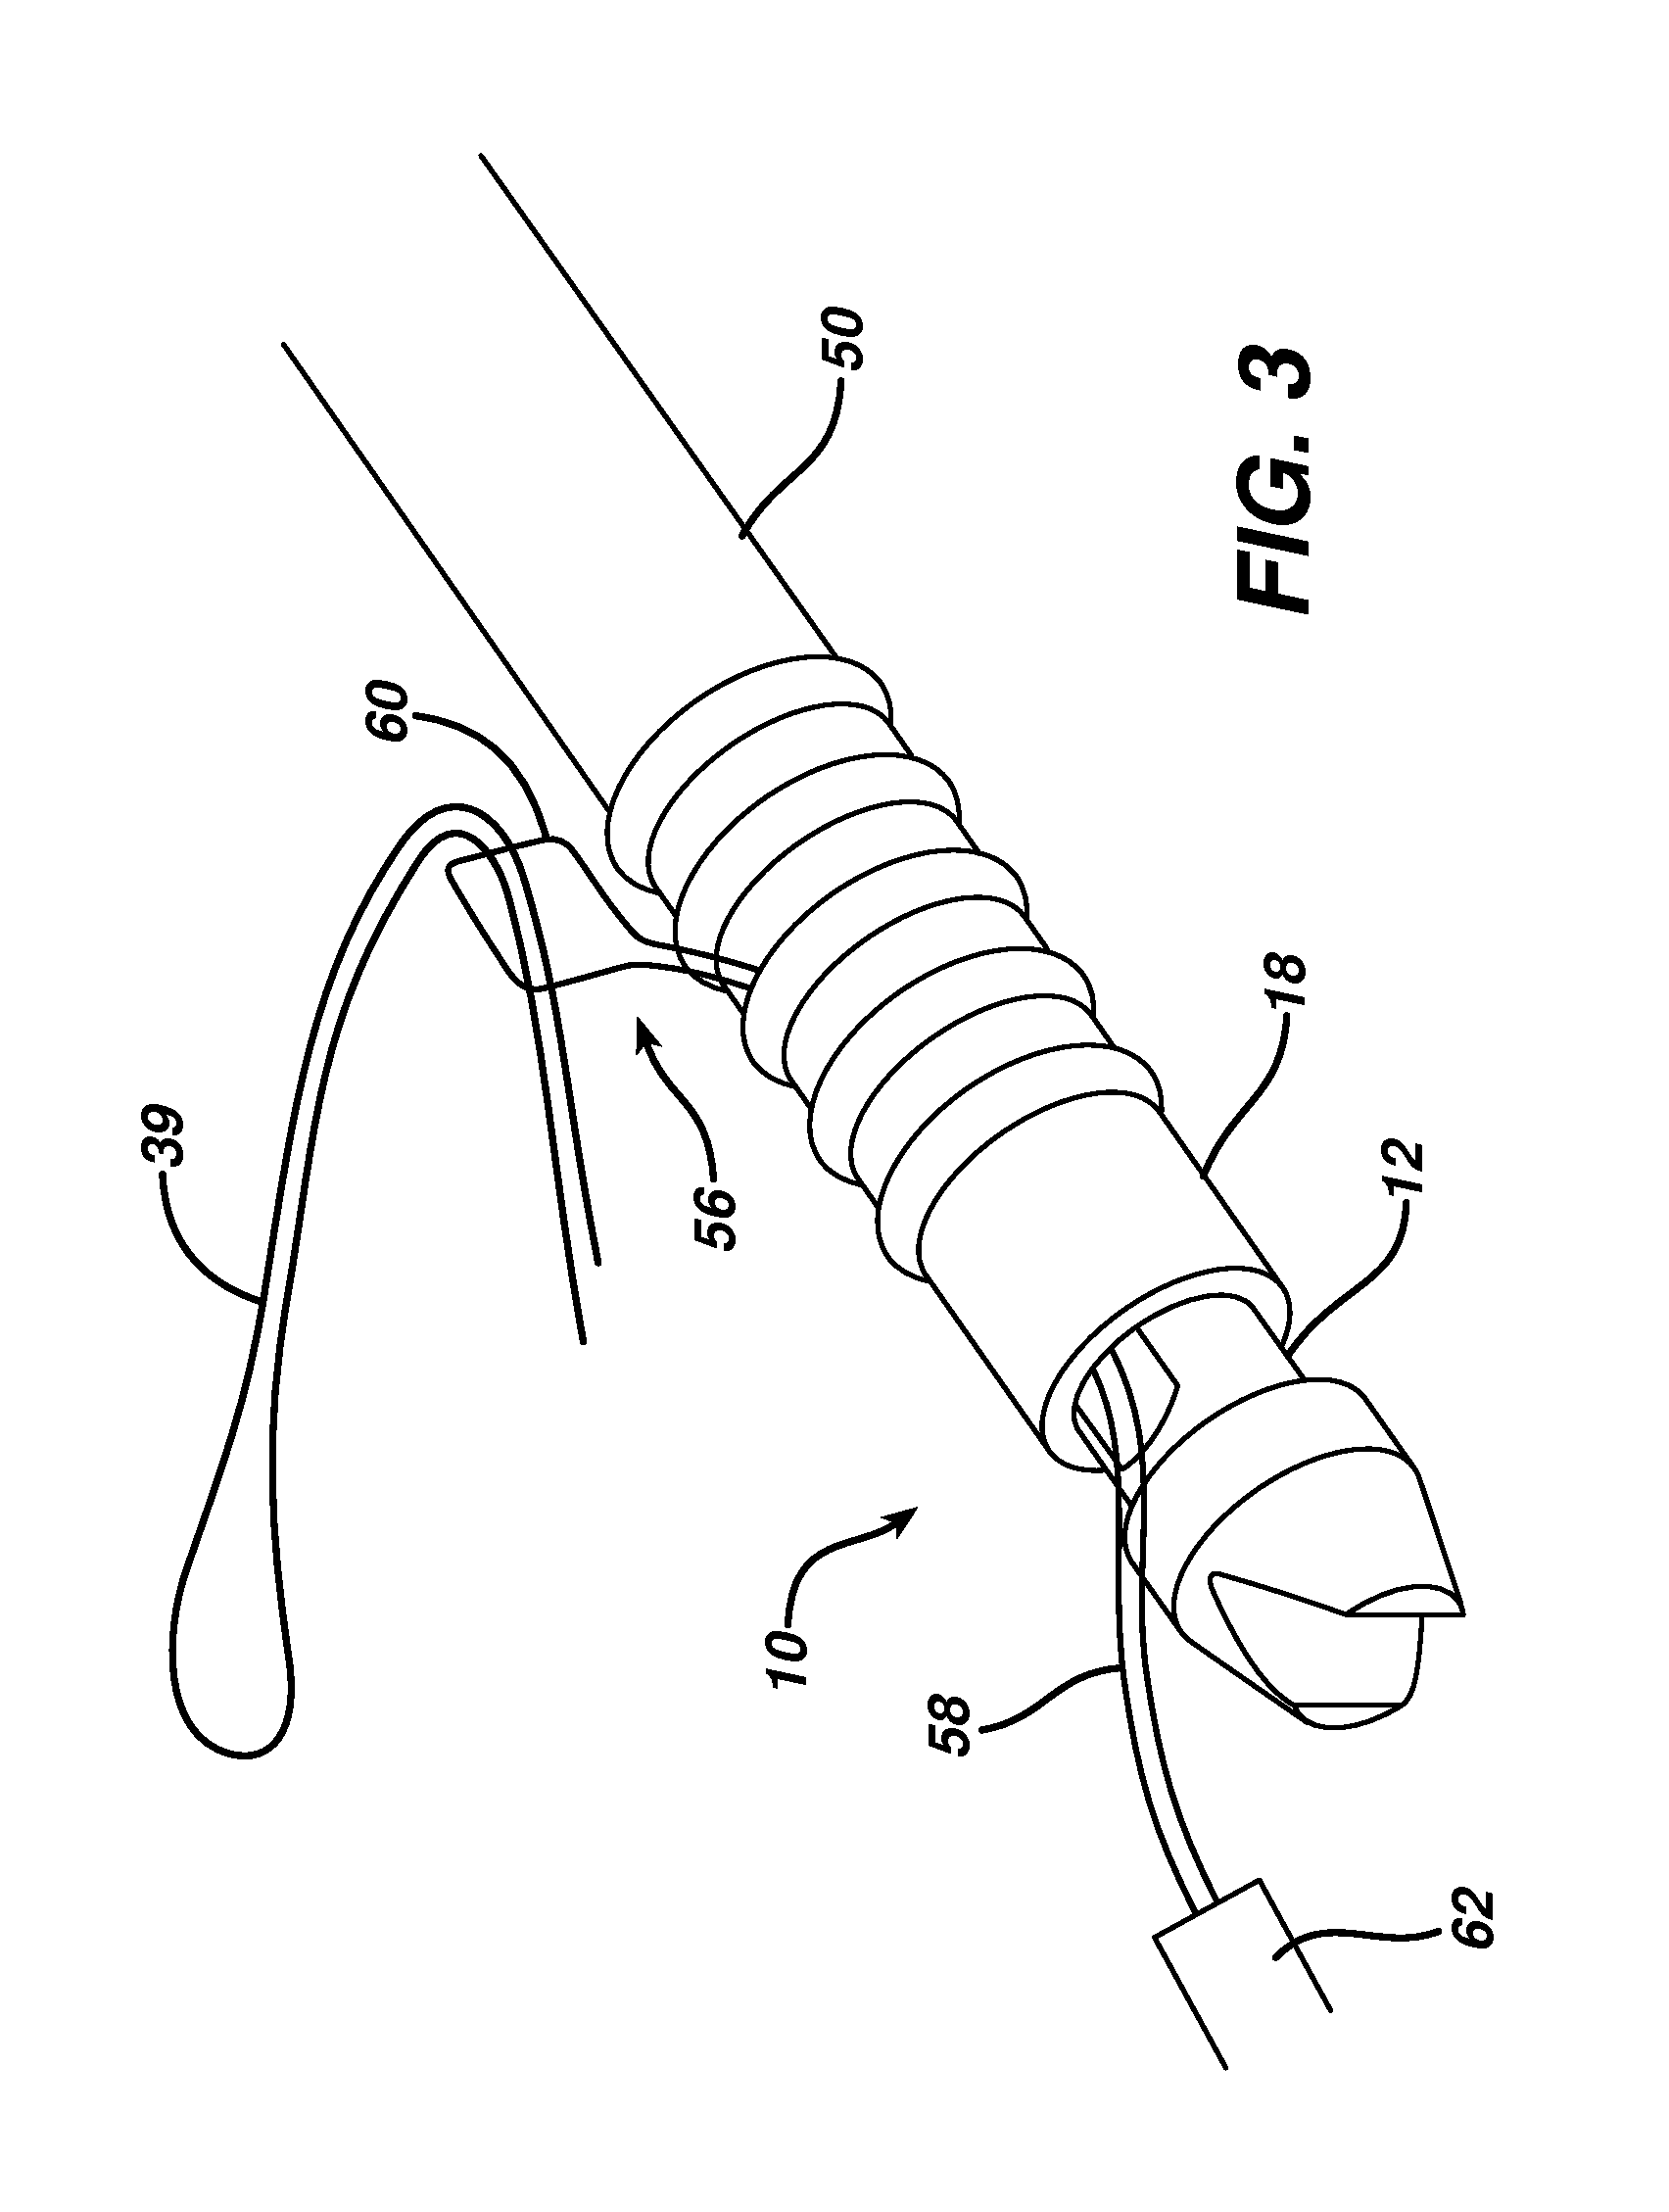 Knotless suture anchor